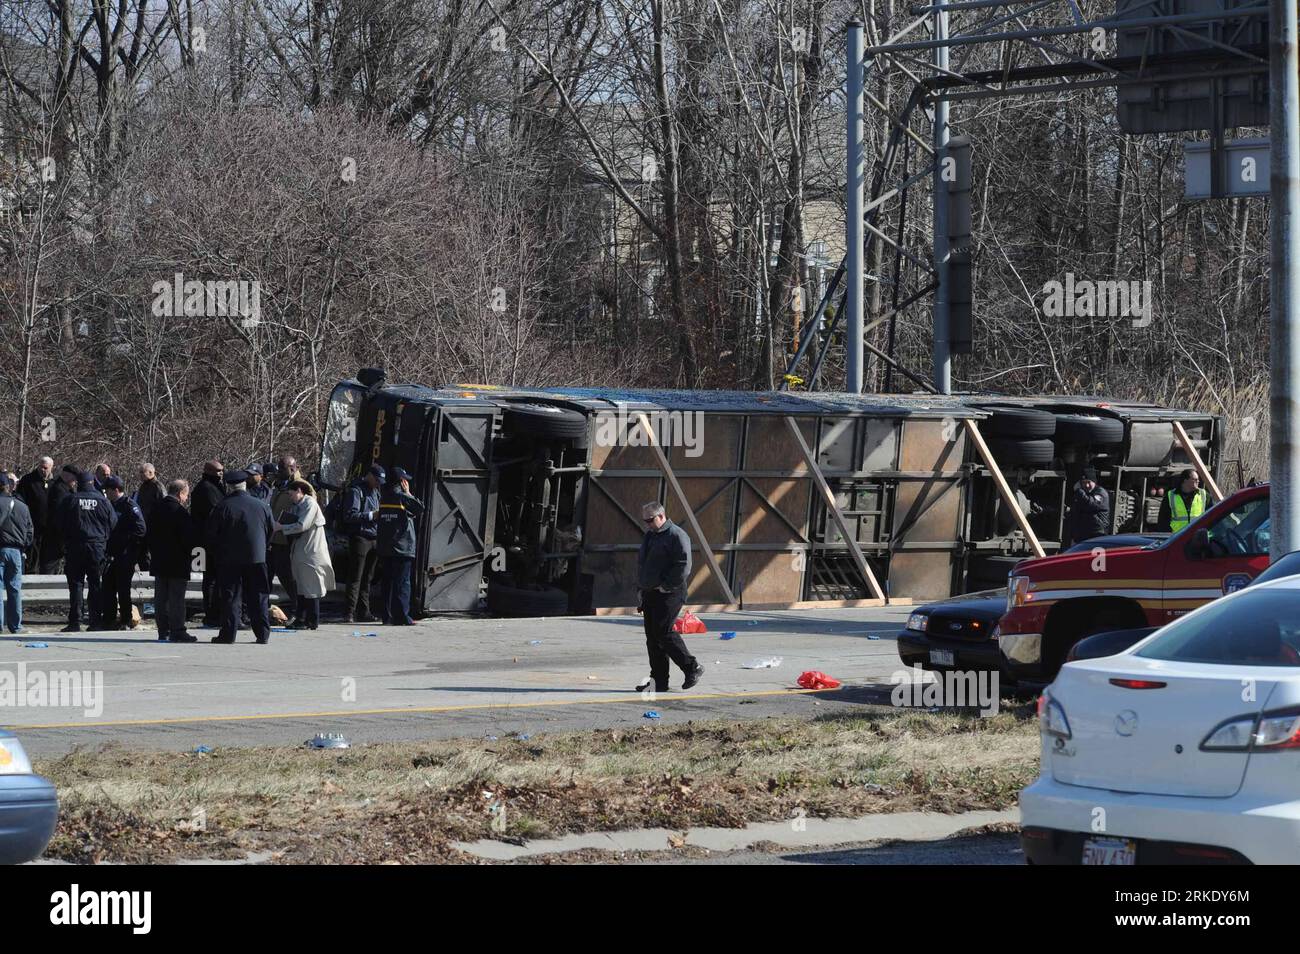 Bildnummer: 55016886  Datum: 12.03.2011  Copyright: imago/Xinhua (110312) -- NEW YORK, March 12, 2011 (Xinhua) -- gather at the site where a tour bus overturned on the New England Thruway in the Bronx near the Westchester County line, the United States, on March 12, 2011. Thirteen were killed and six others seriously injured when a tour bus overturned on a highway in the U.S. state of New York on Saturday. (Xinhua/Shen Hong) (lr) U.S.-NEW YORK-BUS ACCIDENT PUBLICATIONxNOTxINxCHN Gesellschaft Busunglück Busunfall Verkehrsunfall kbdig xsp 2011 quer  o0 Bus, Unfall, Unglück, Totale    Bildnummer Stock Photo